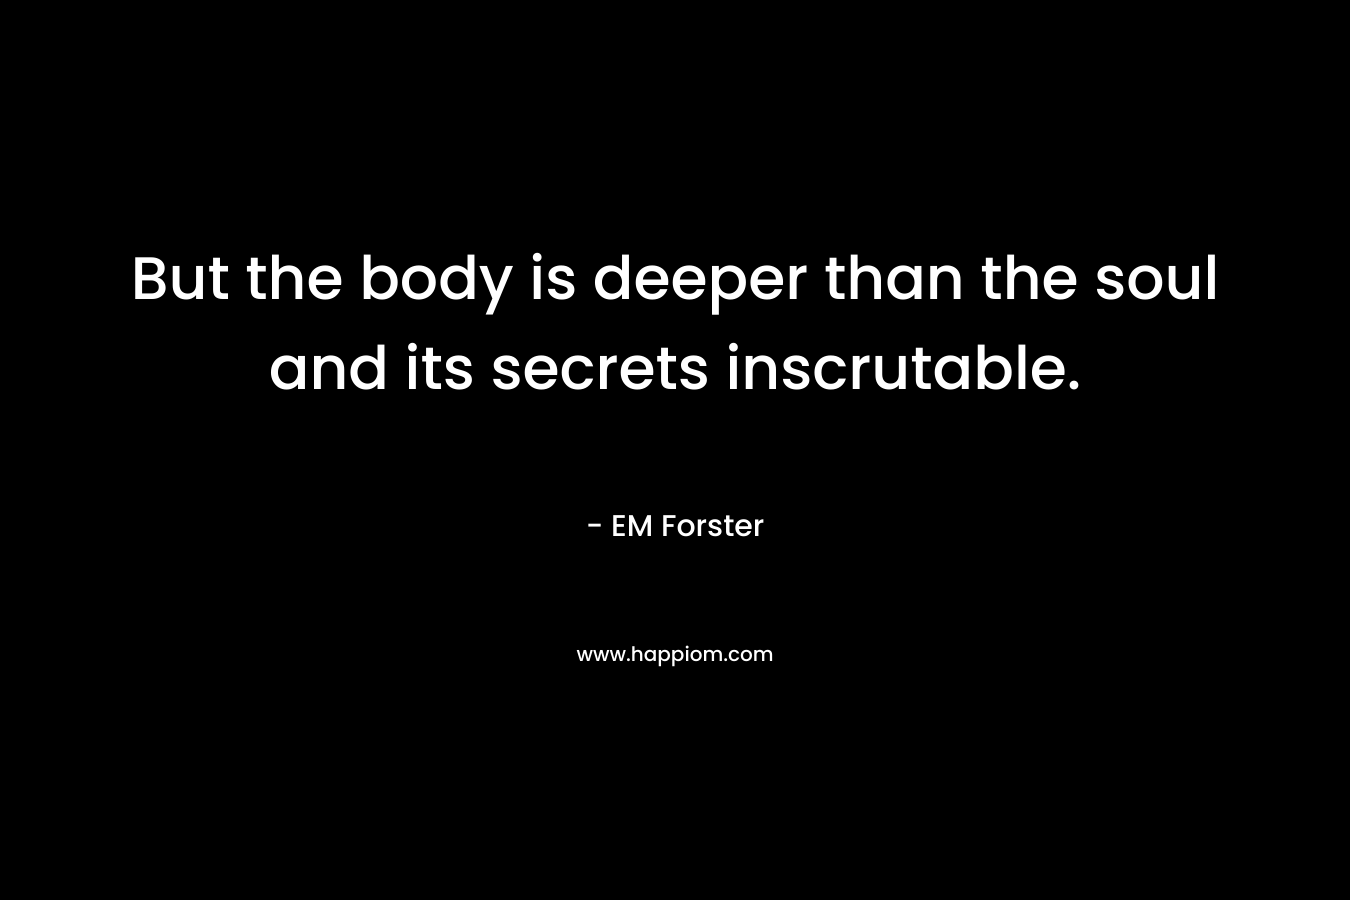 But the body is deeper than the soul and its secrets inscrutable.